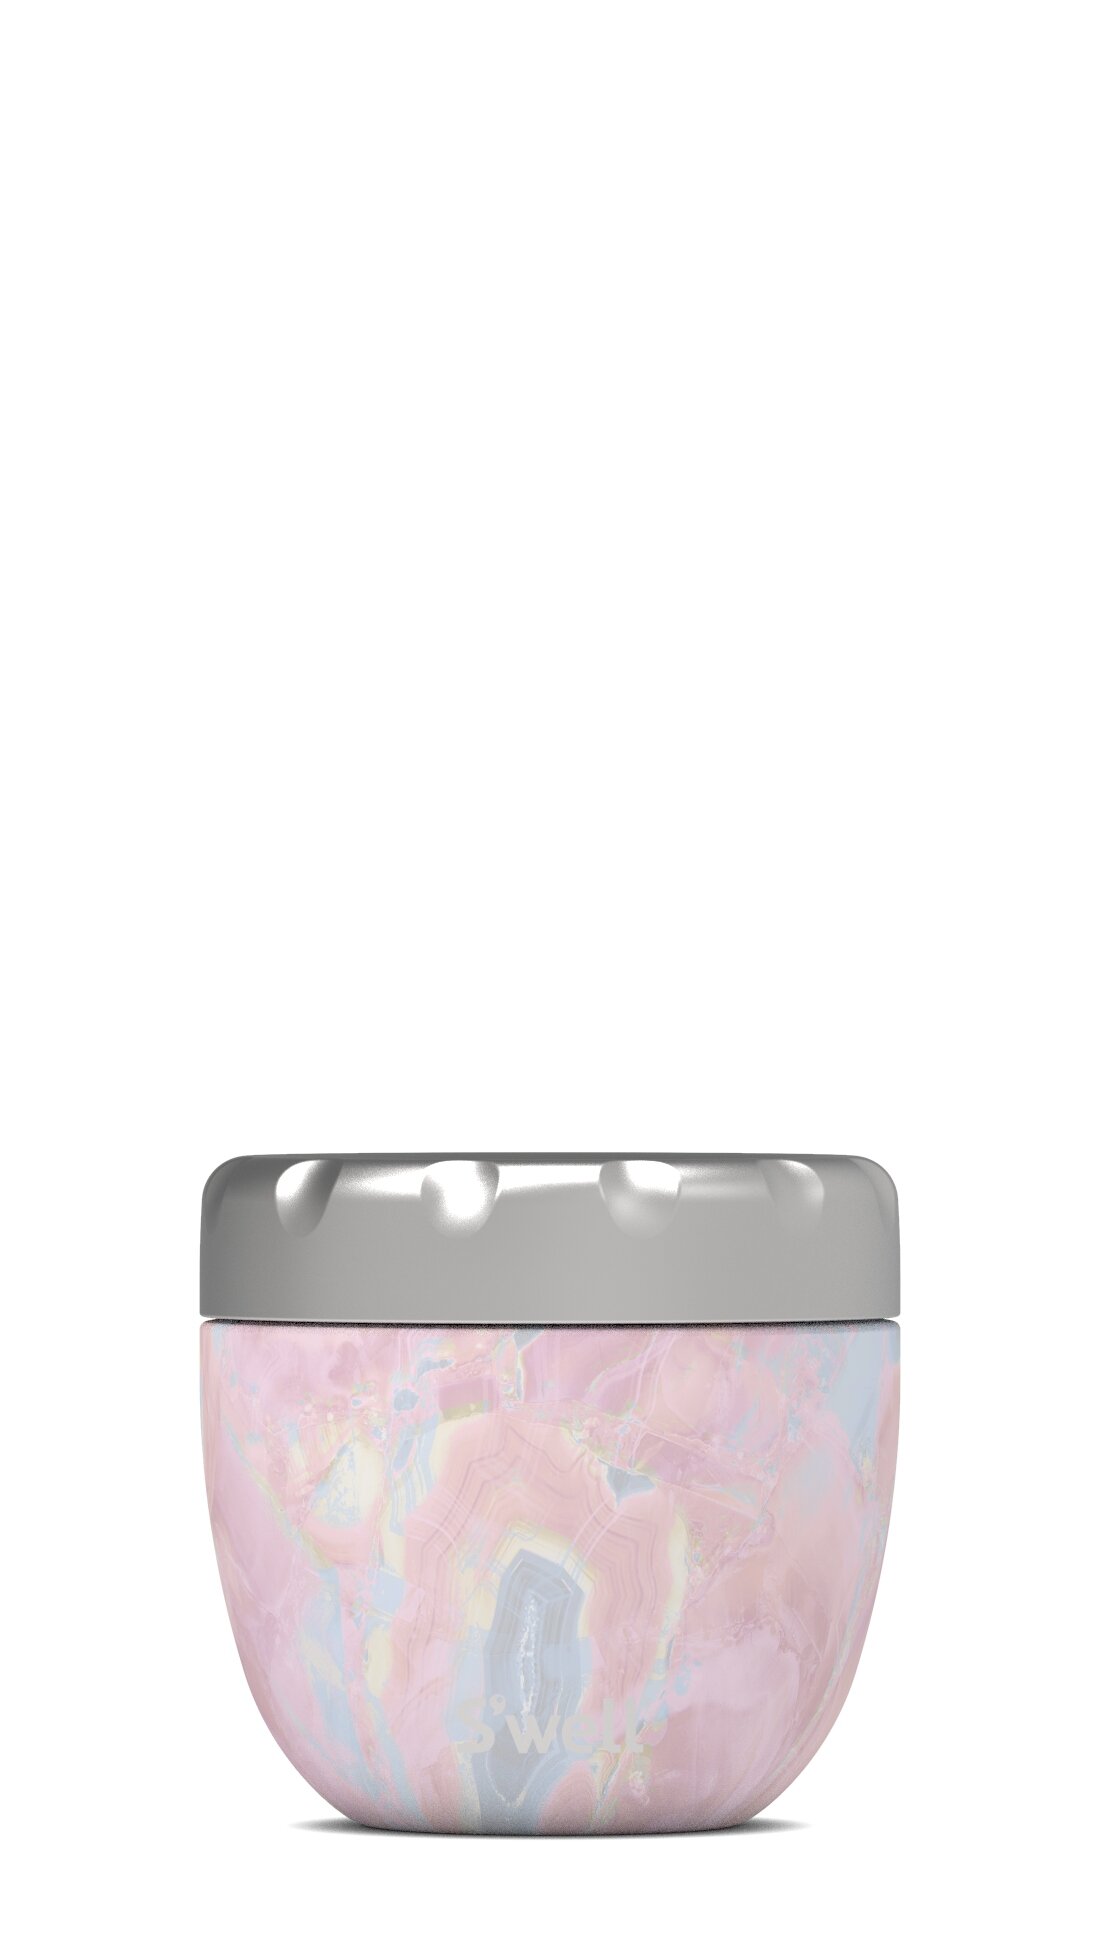 S'well Eats Food Storage Container, 16 oz.